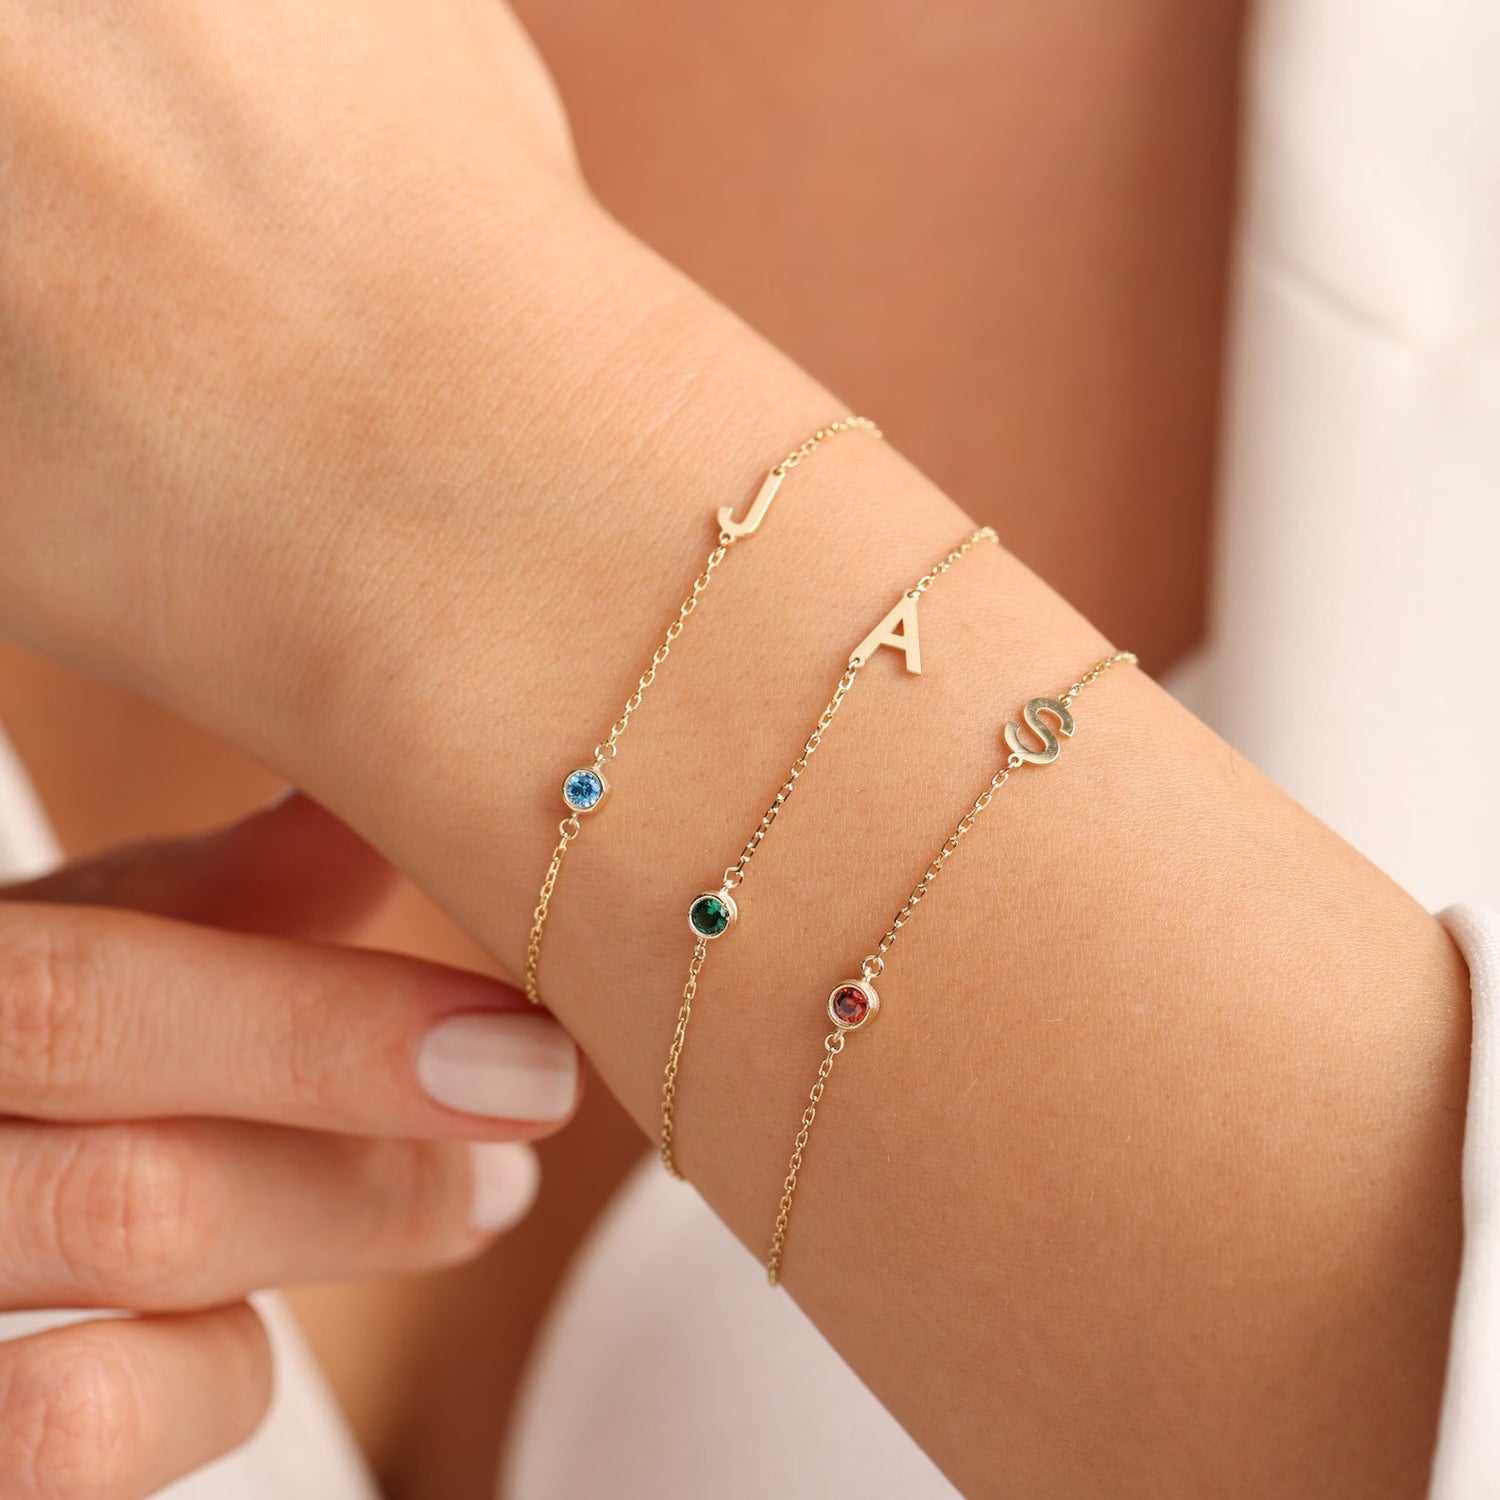 SUMMER LOVE Magnetic Matching Couples Bracelets Long Distance India | Ubuy